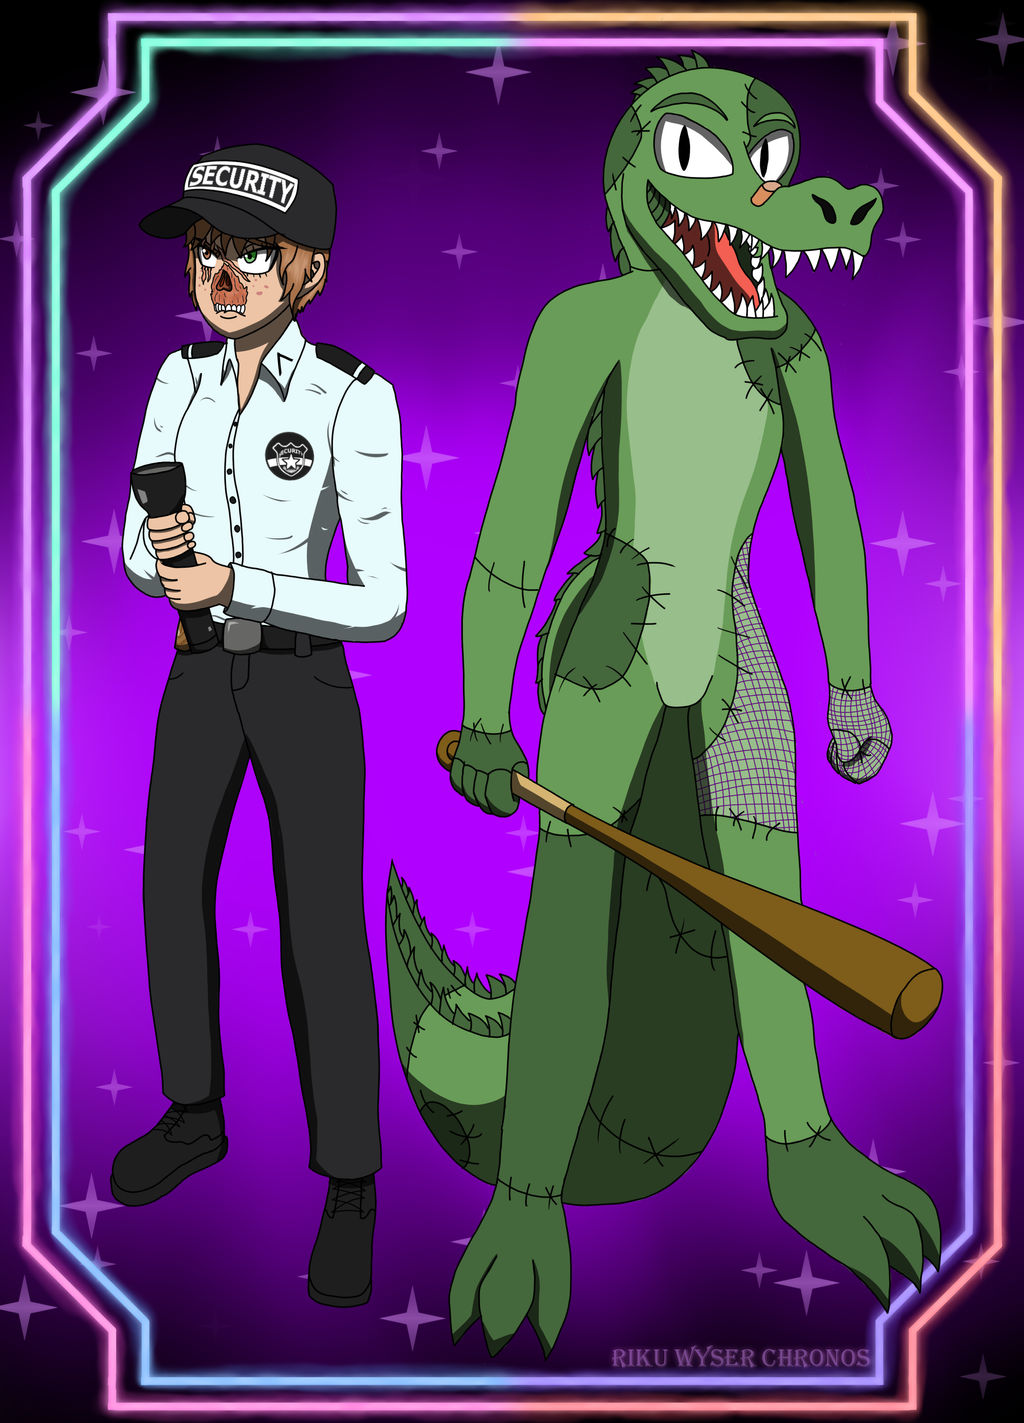 FNAF Security Breach anime by TheVoices2000 on DeviantArt